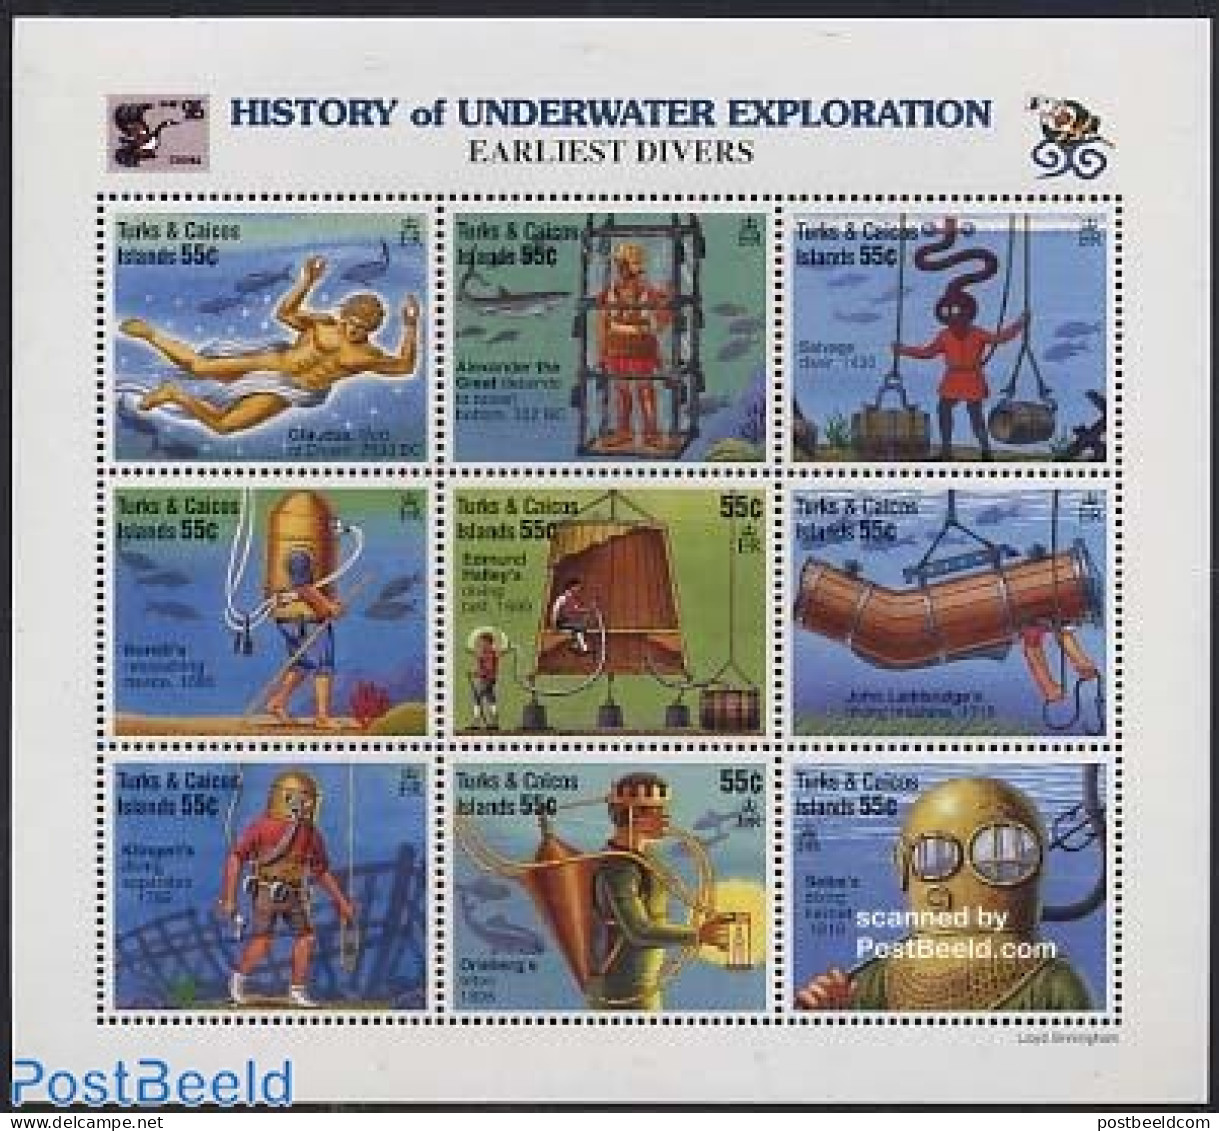 Turks And Caicos Islands 1996 Diving 9v M/s, China 96, Mint NH, Sport - Diving - Philately - Diving